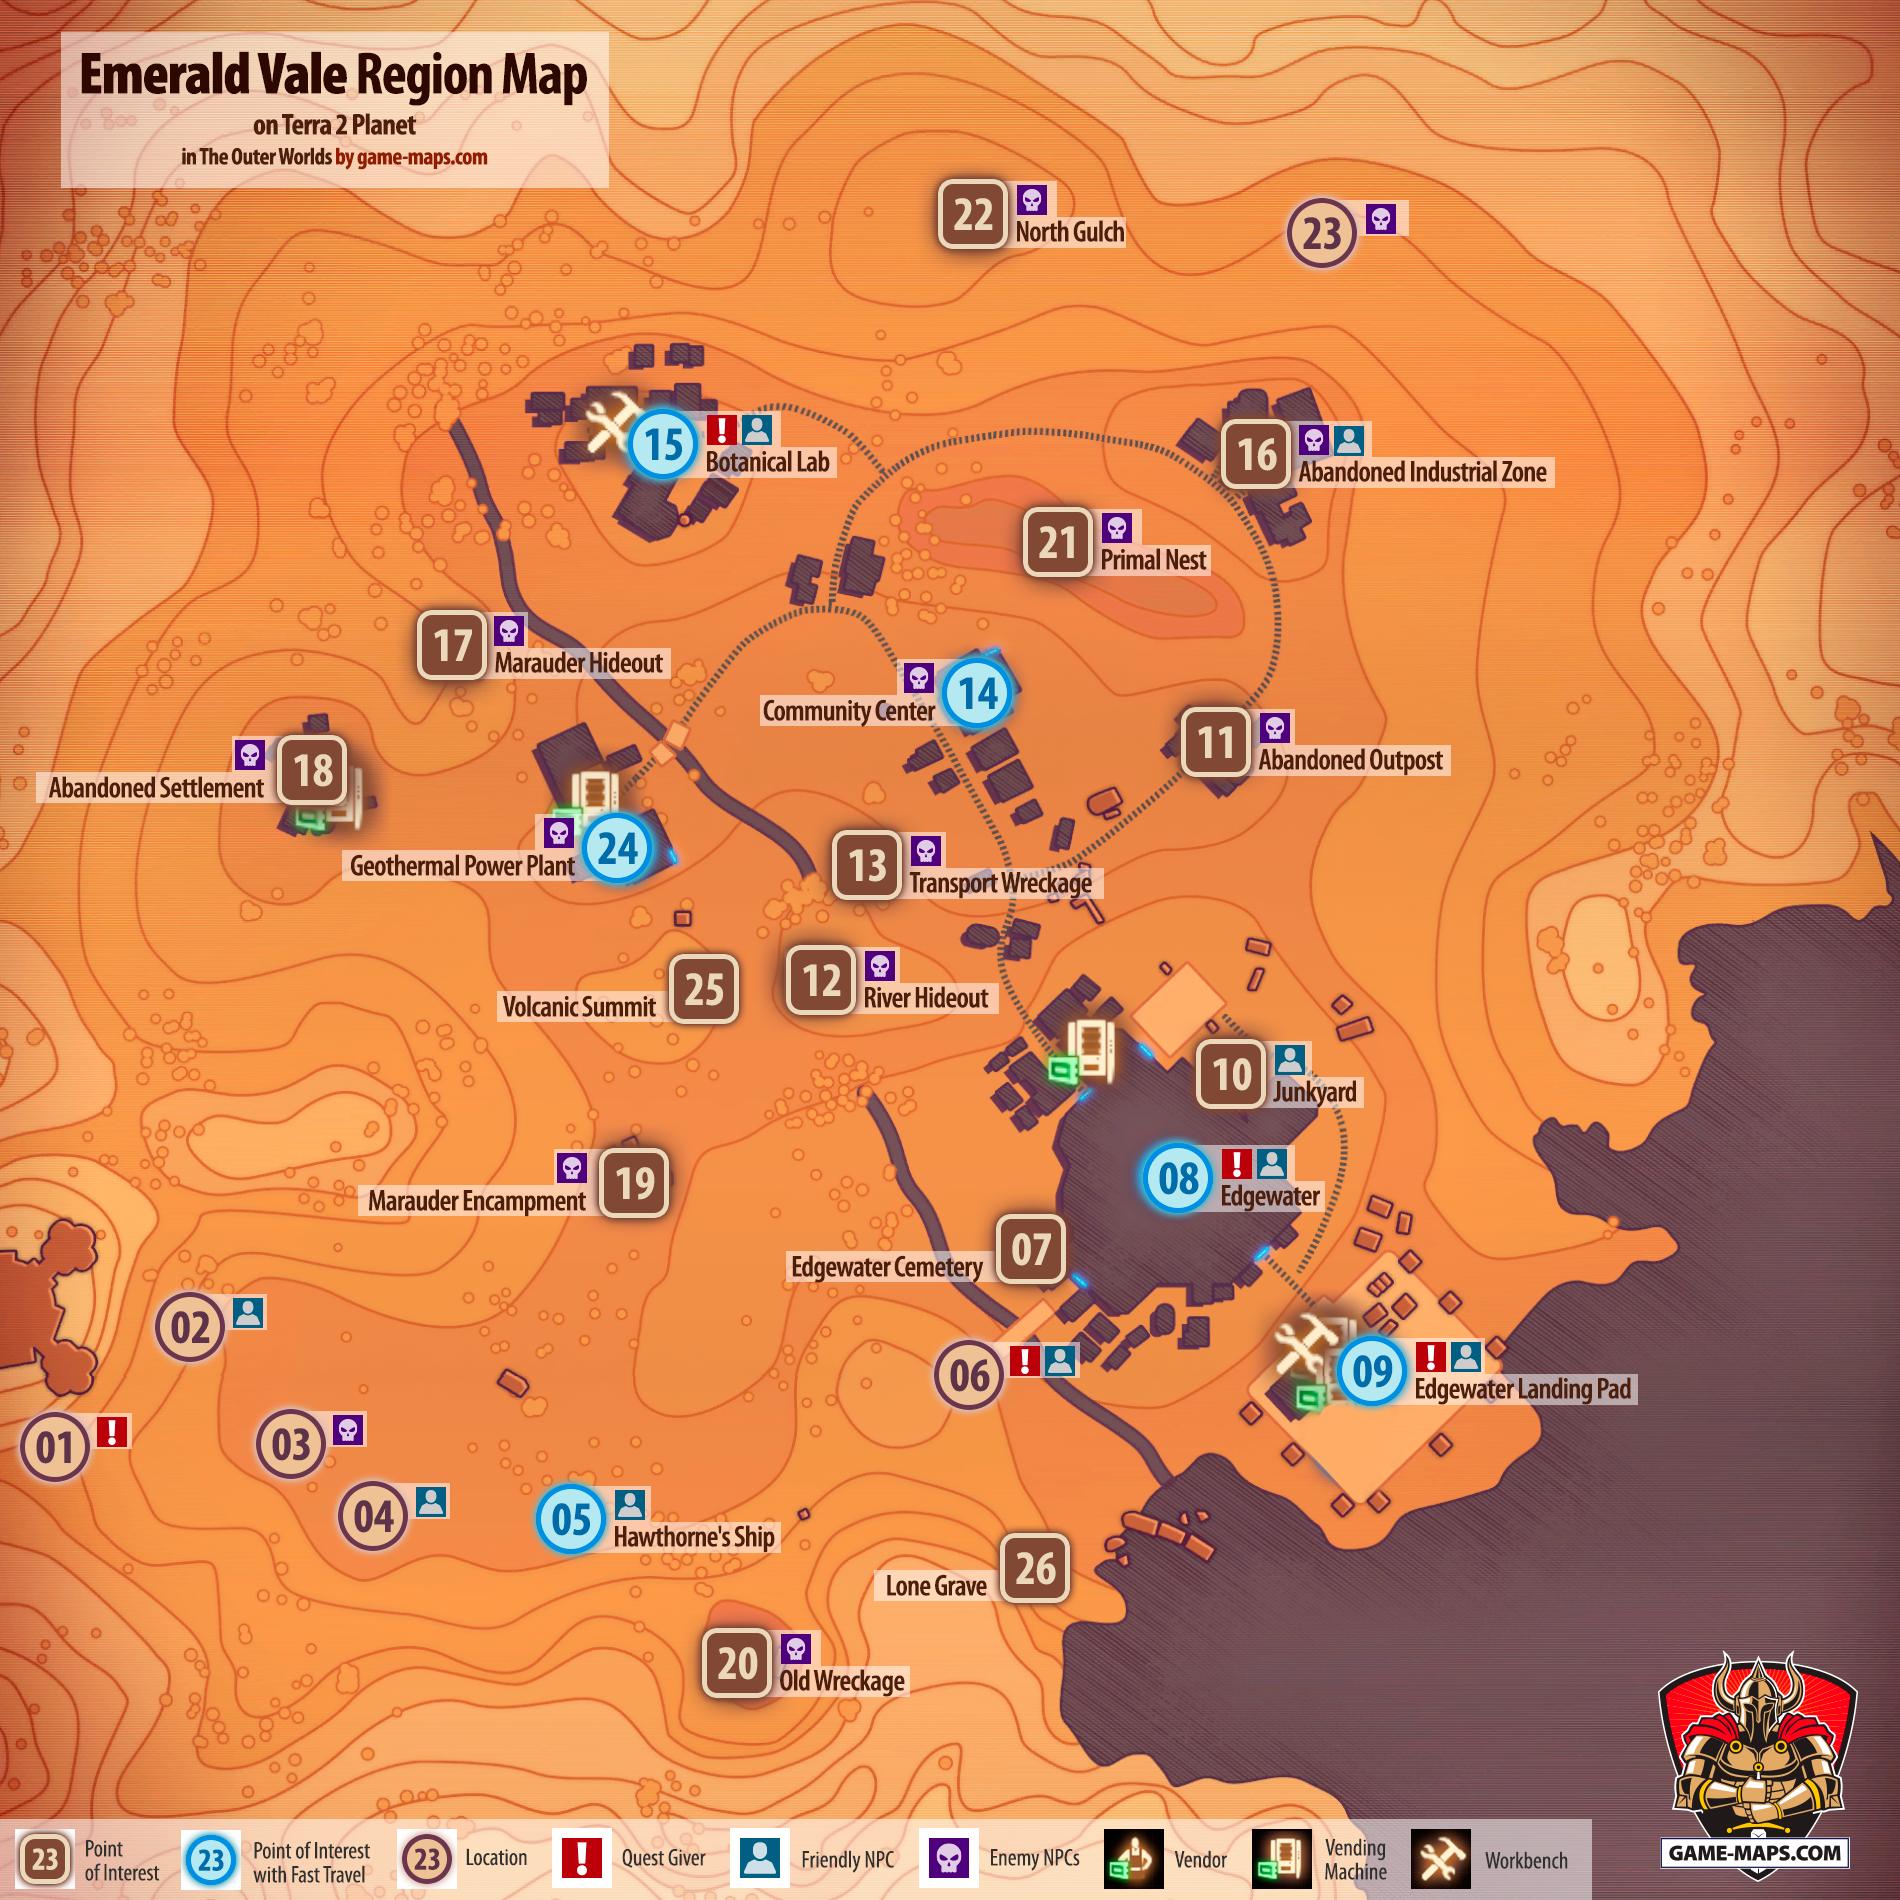 Emerald Vale Region Map on Terra 2 Planet for The Outer Worlds